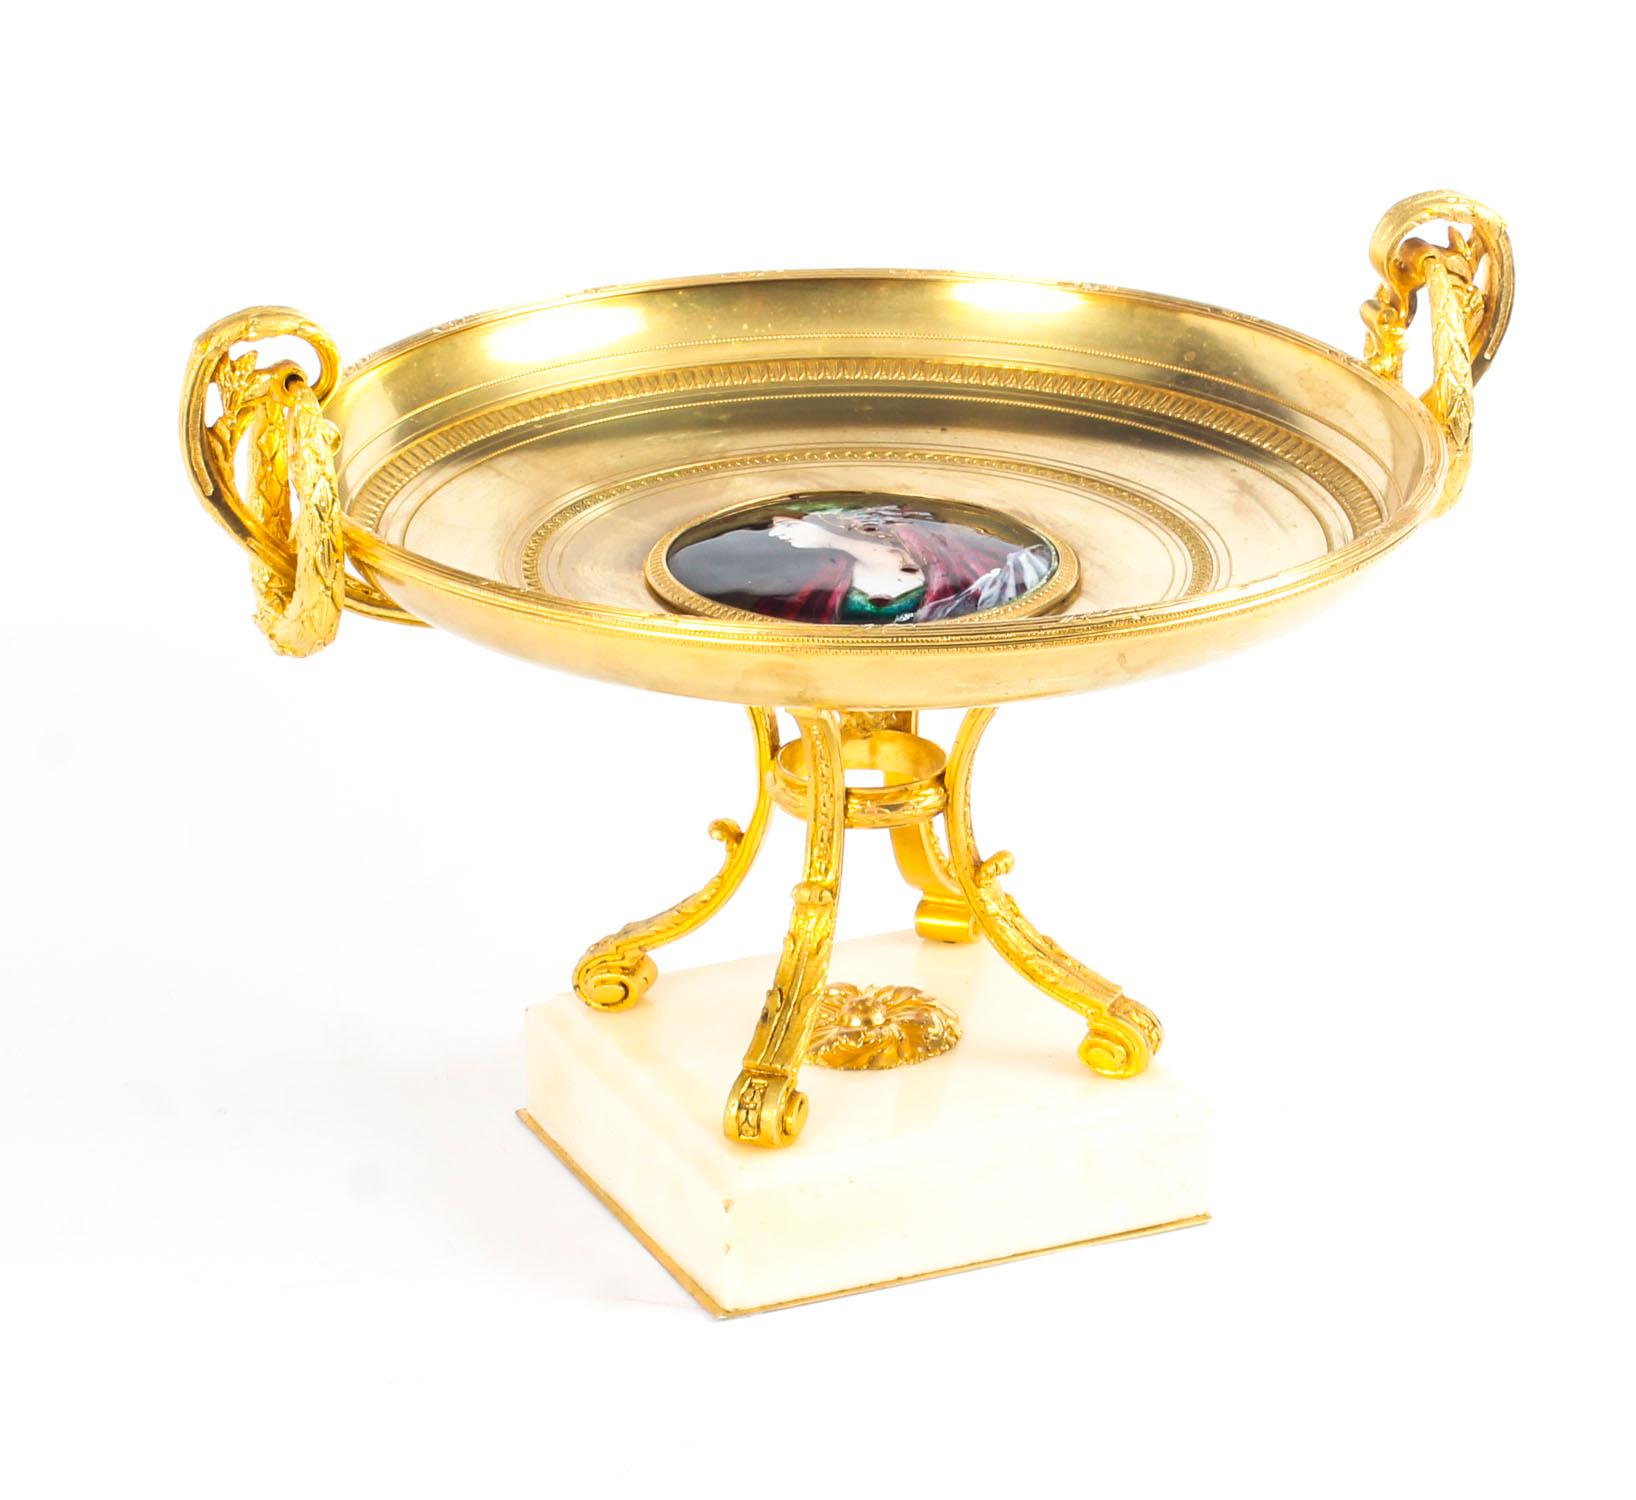 Antique French Ormolu Tazza with Limoges Enamel Plaque, 19th Century For Sale 9